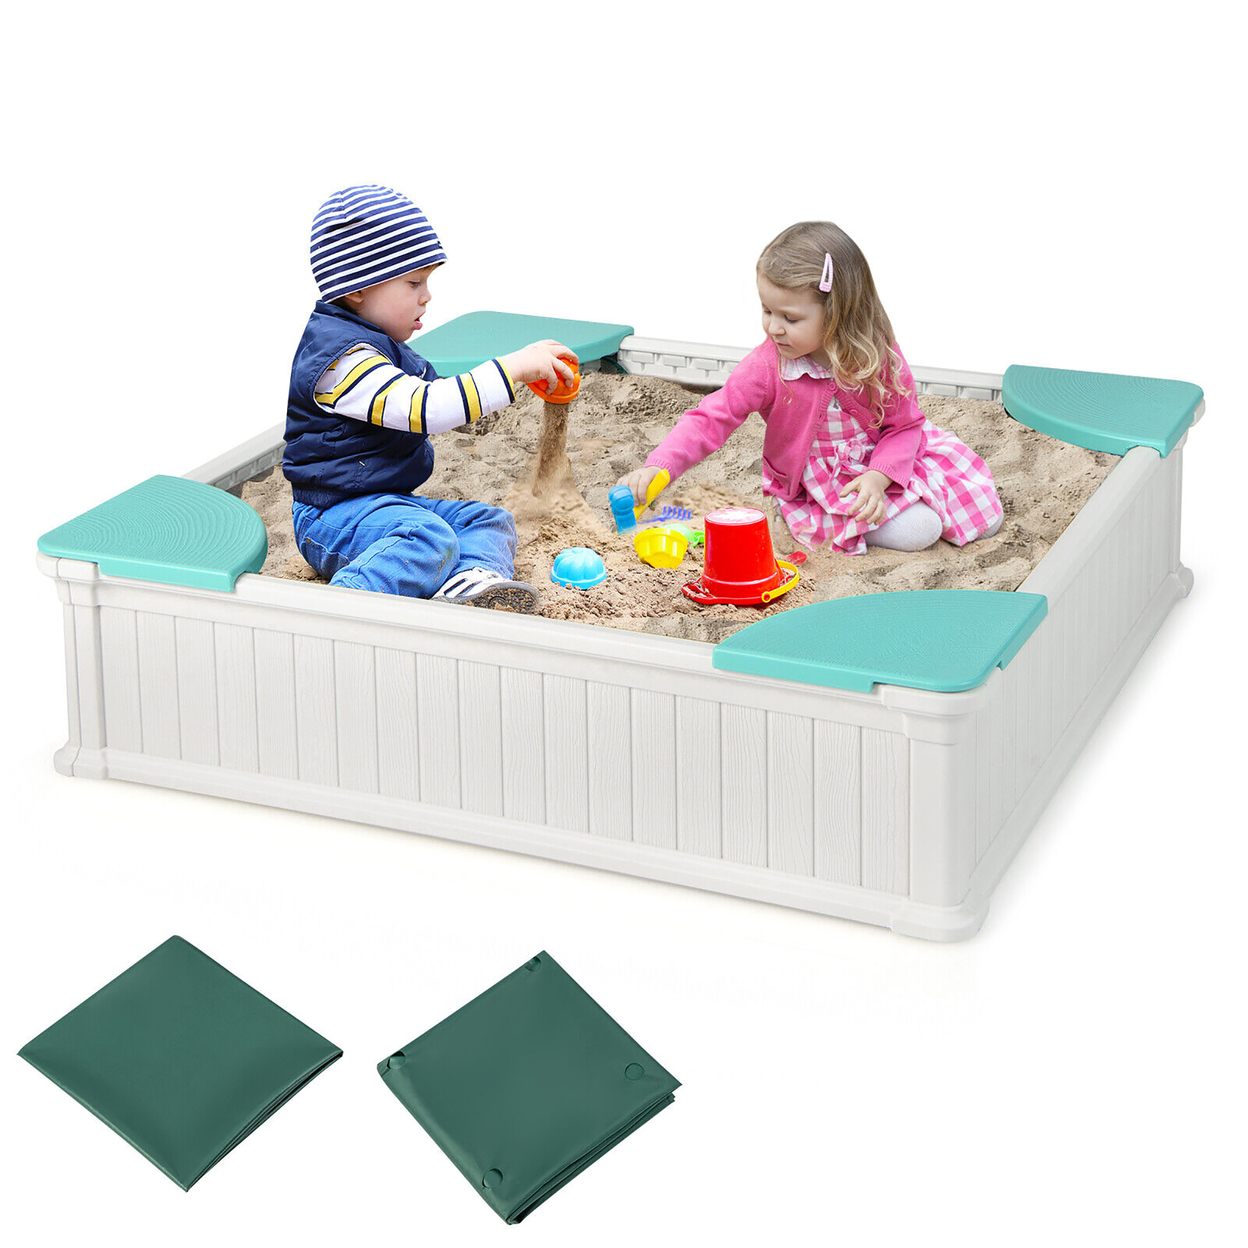 Kids Outdoor Sandbox 48.5'' X 48.5'' X 12.5'' Large HDPE Sandpit With Oxford Cover - White